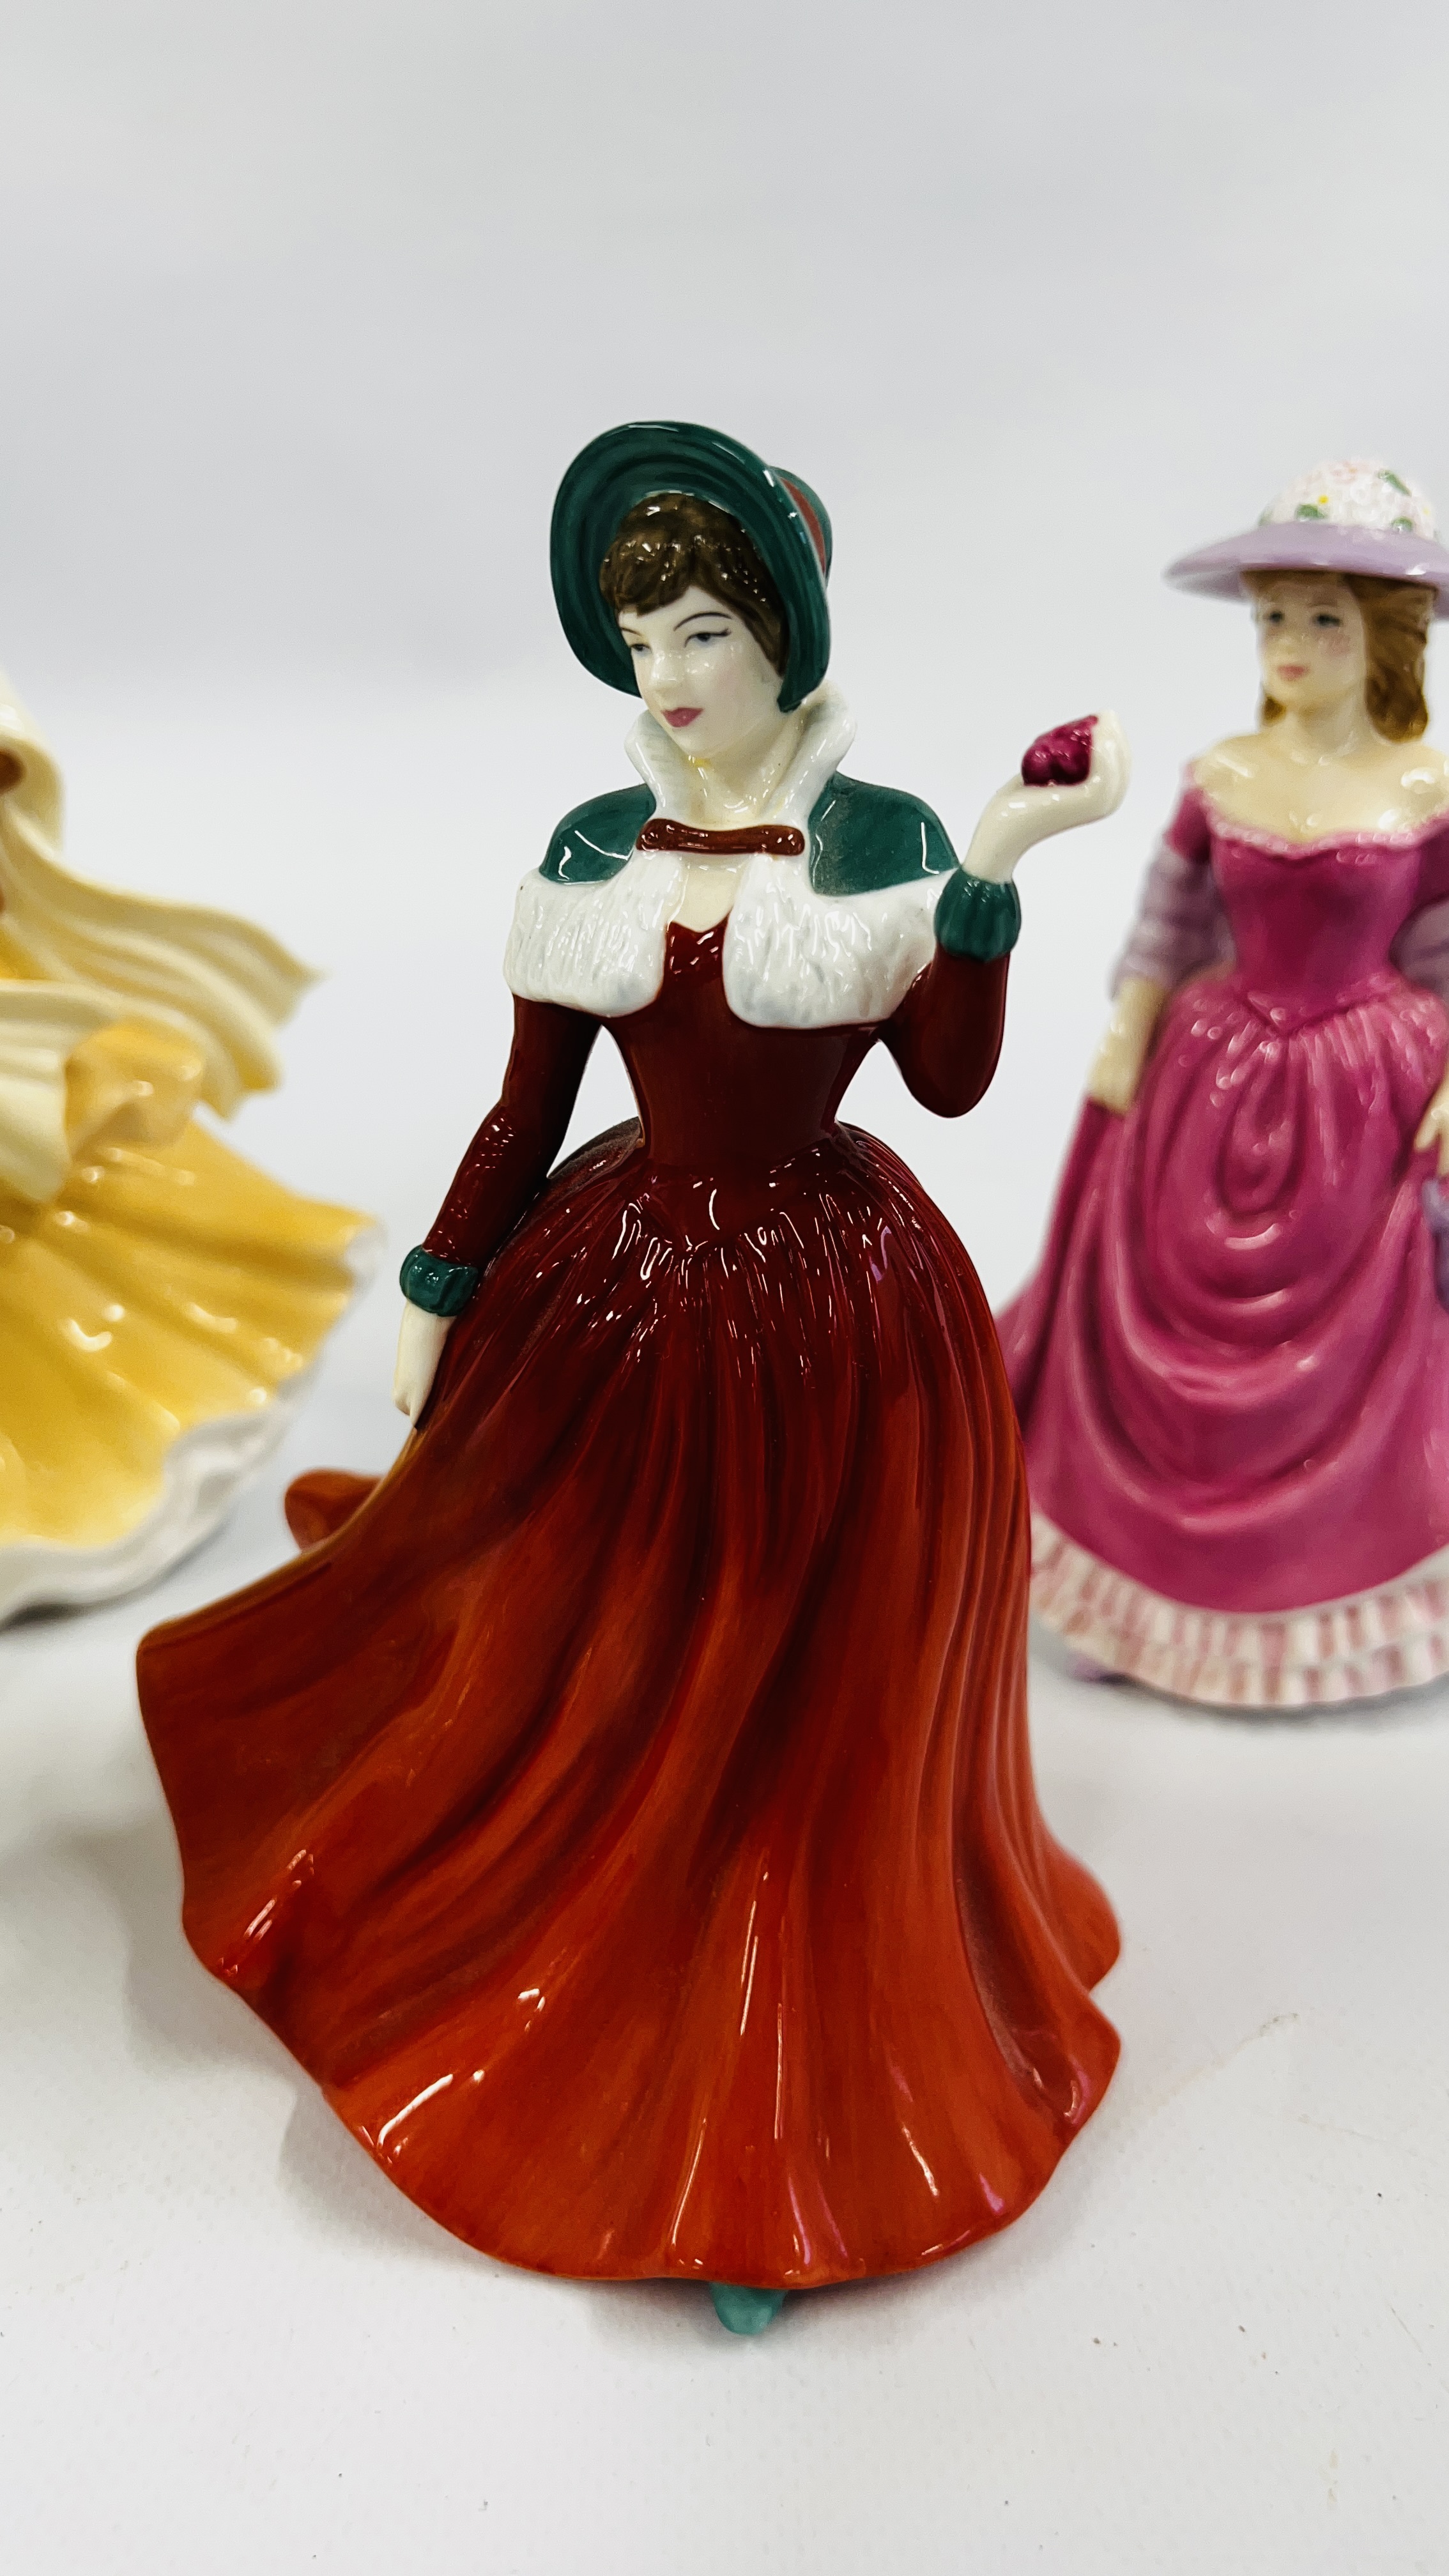 3 ROYAL DOULTON CABINET COLLECTORS FIGURES TO INCLUDE "SUMMER BREEZE" HN 4587, - Image 2 of 9